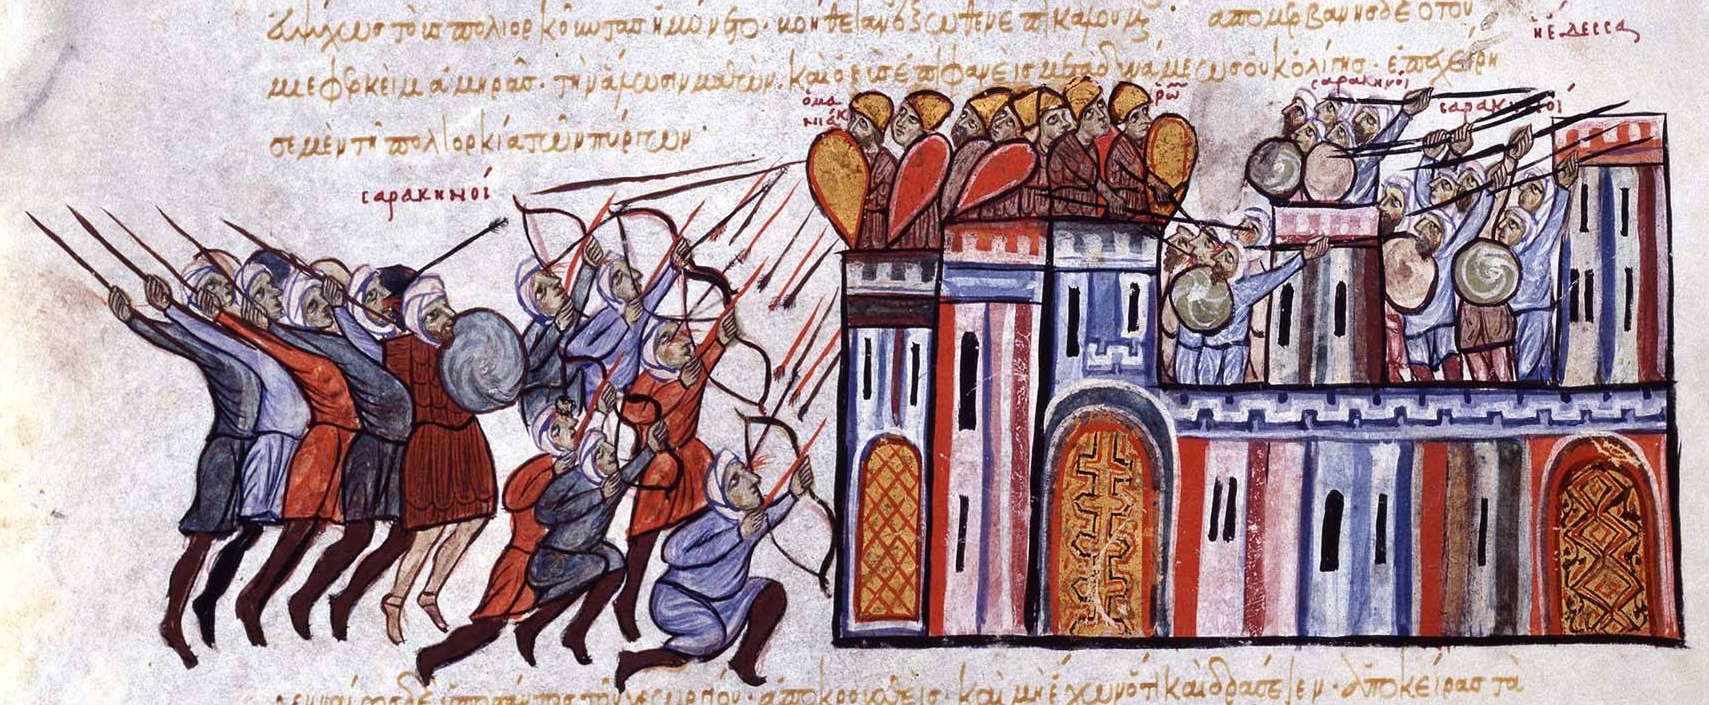 The_seizure_of_Edessa_in_Syria_by_the_Byzantine_army_and_the_Arabic_counterattack_from_the_Chronicle_of_John_Skylitzes